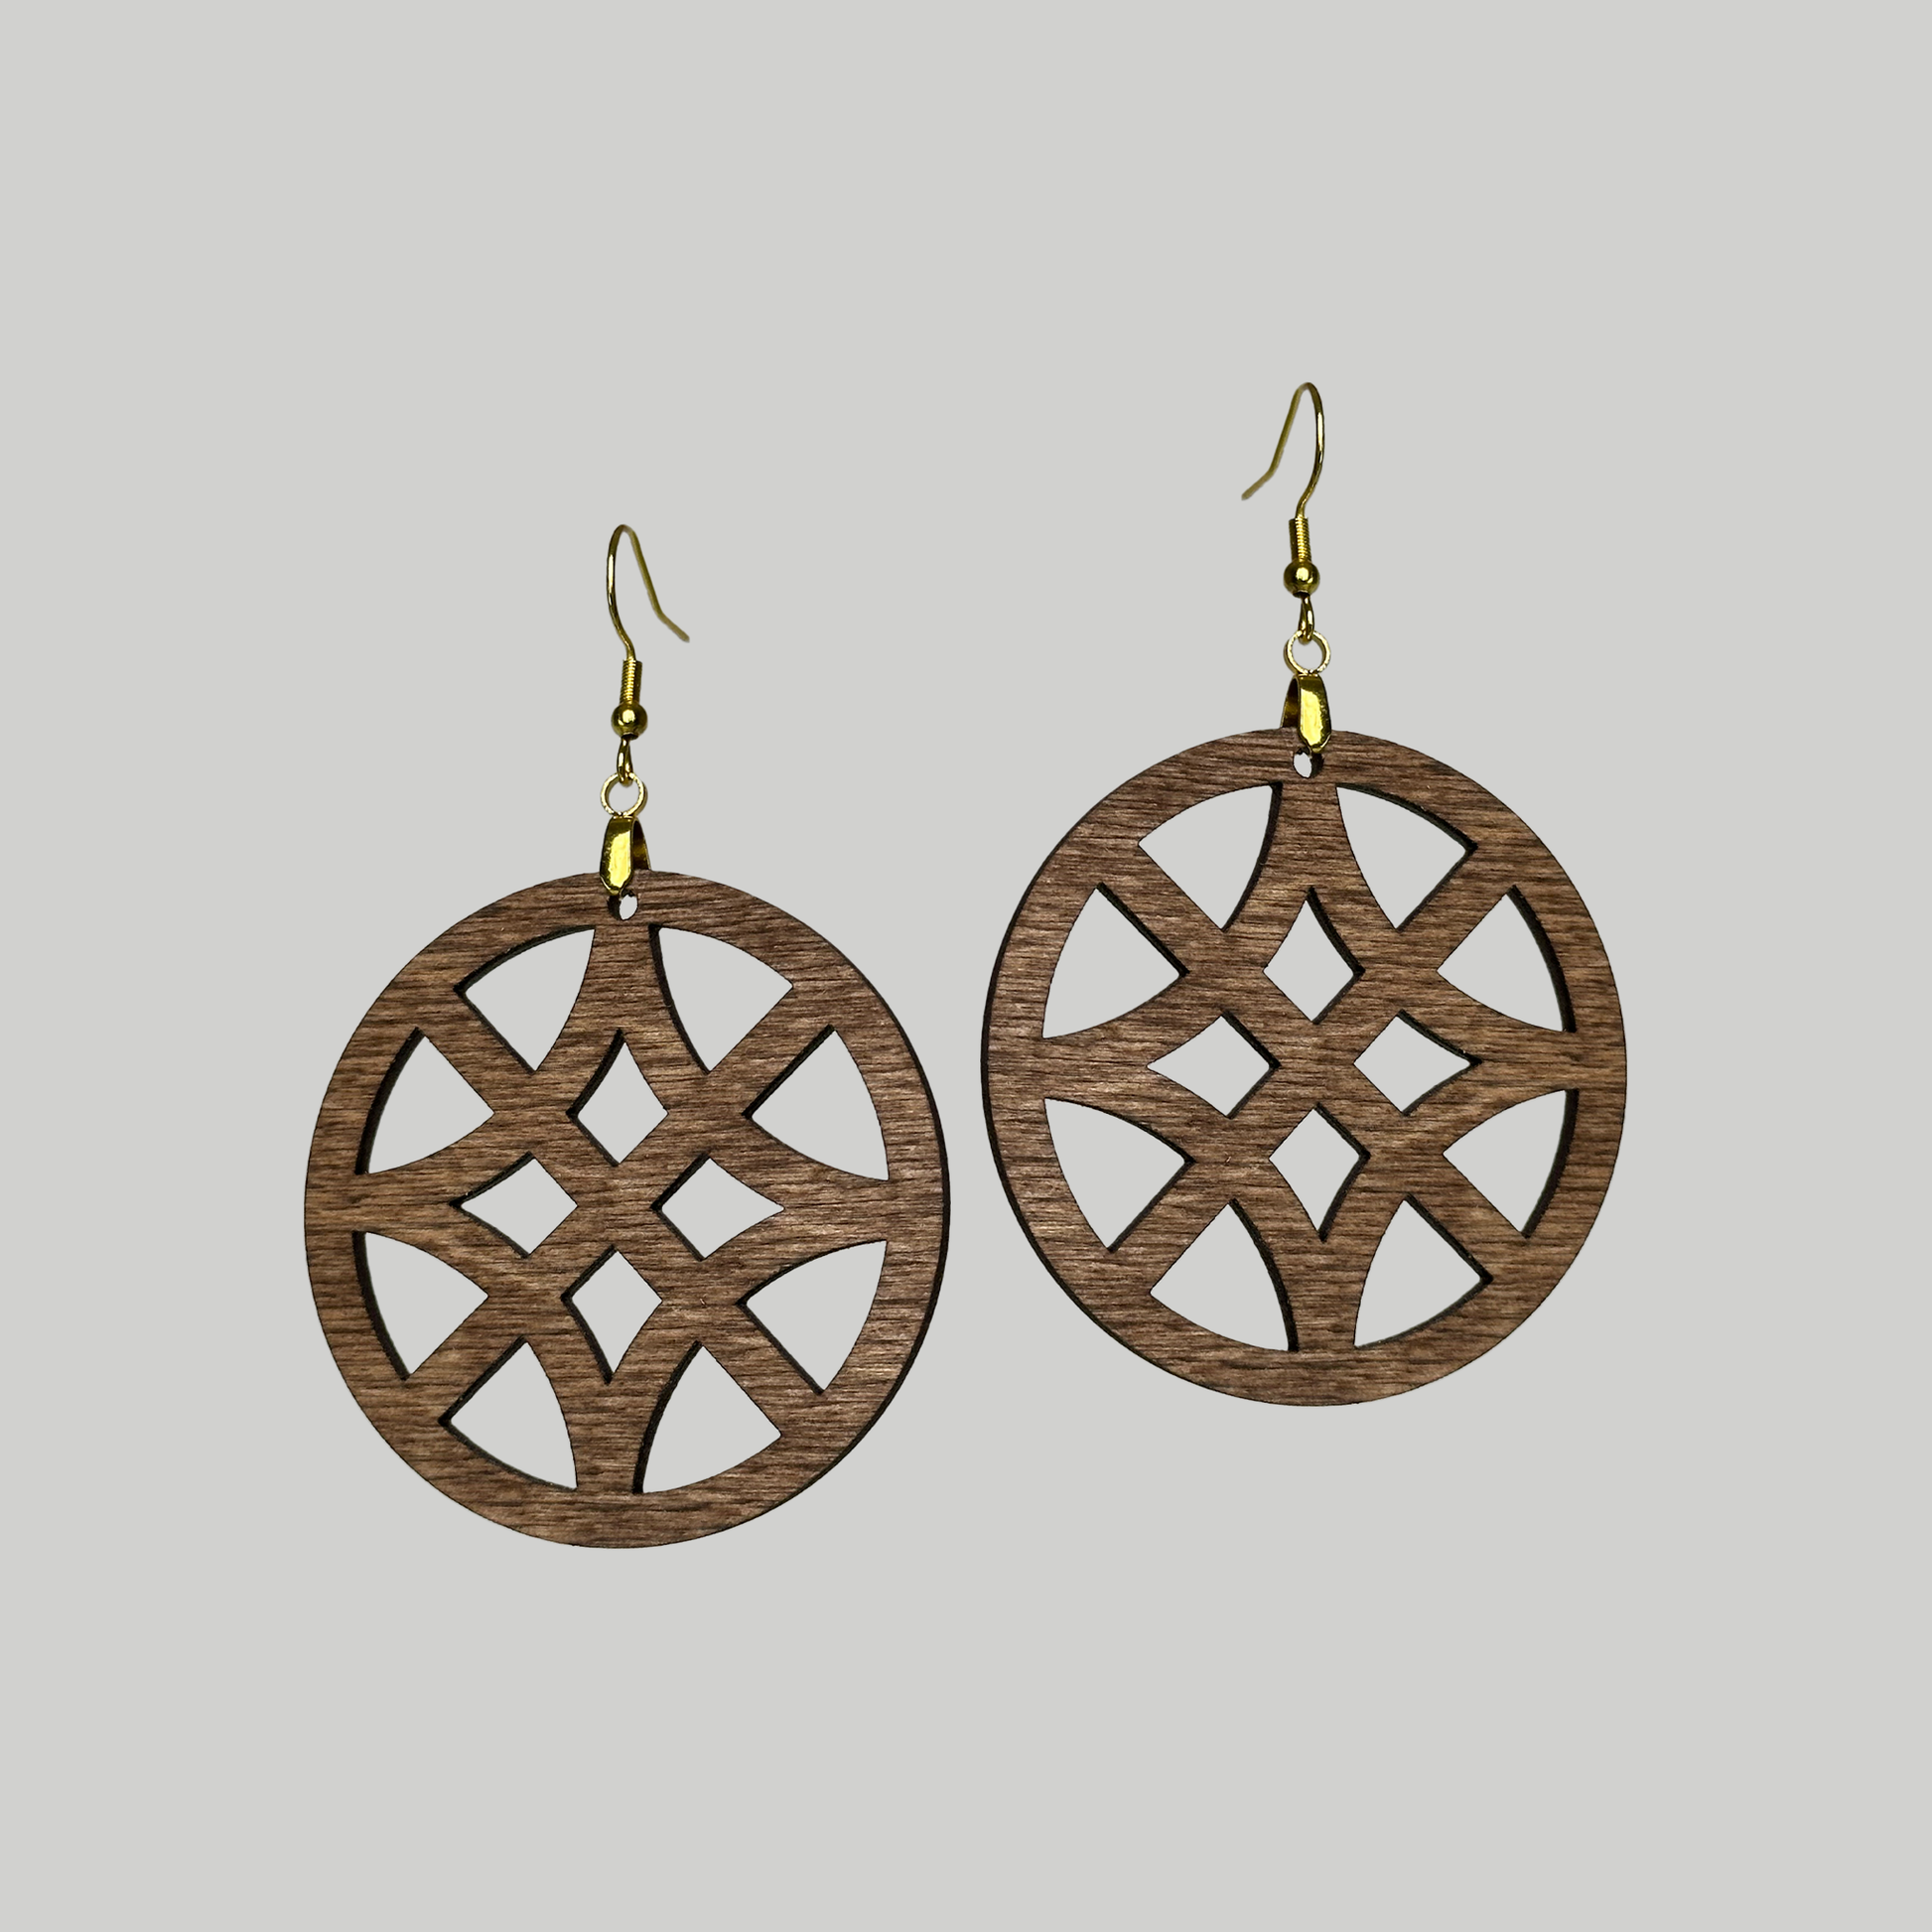 Circle Window Pattern Earrings: Stylish and modern, these earrings feature a captivating circle window pattern for a contemporary look.